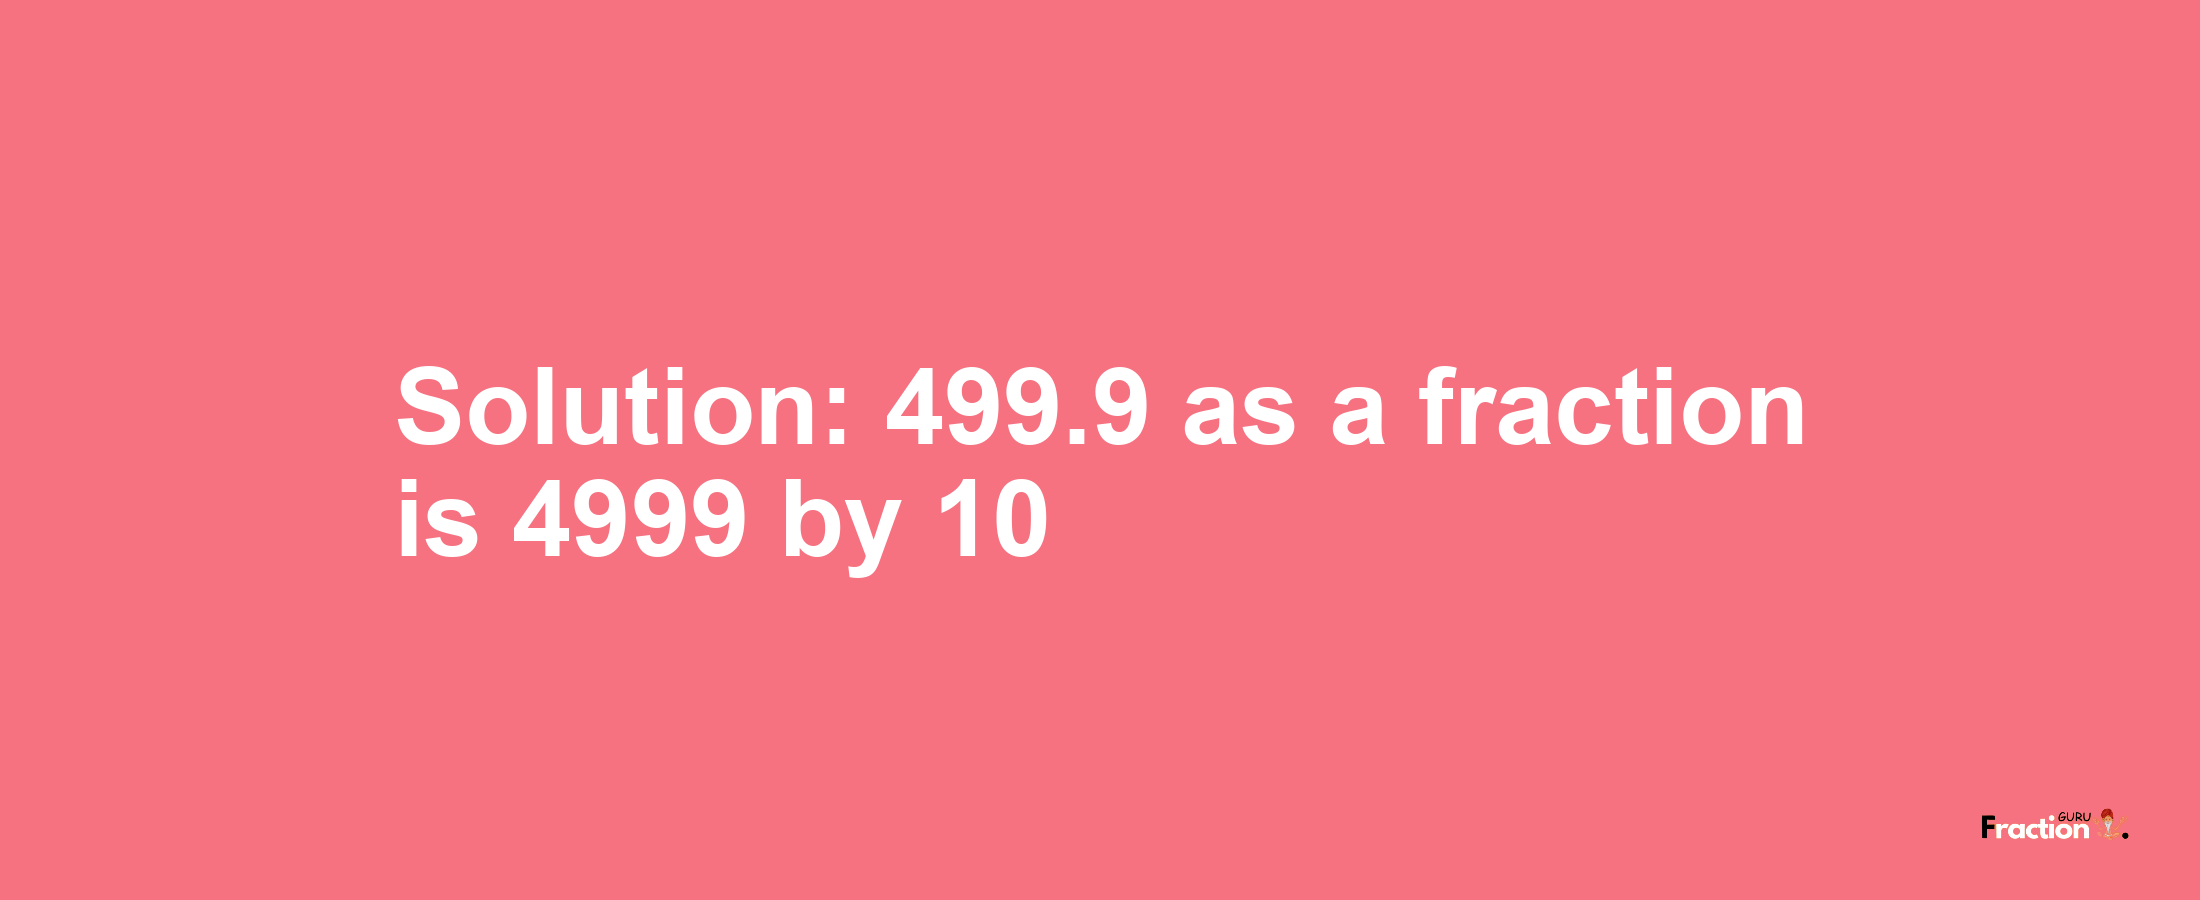 Solution:499.9 as a fraction is 4999/10